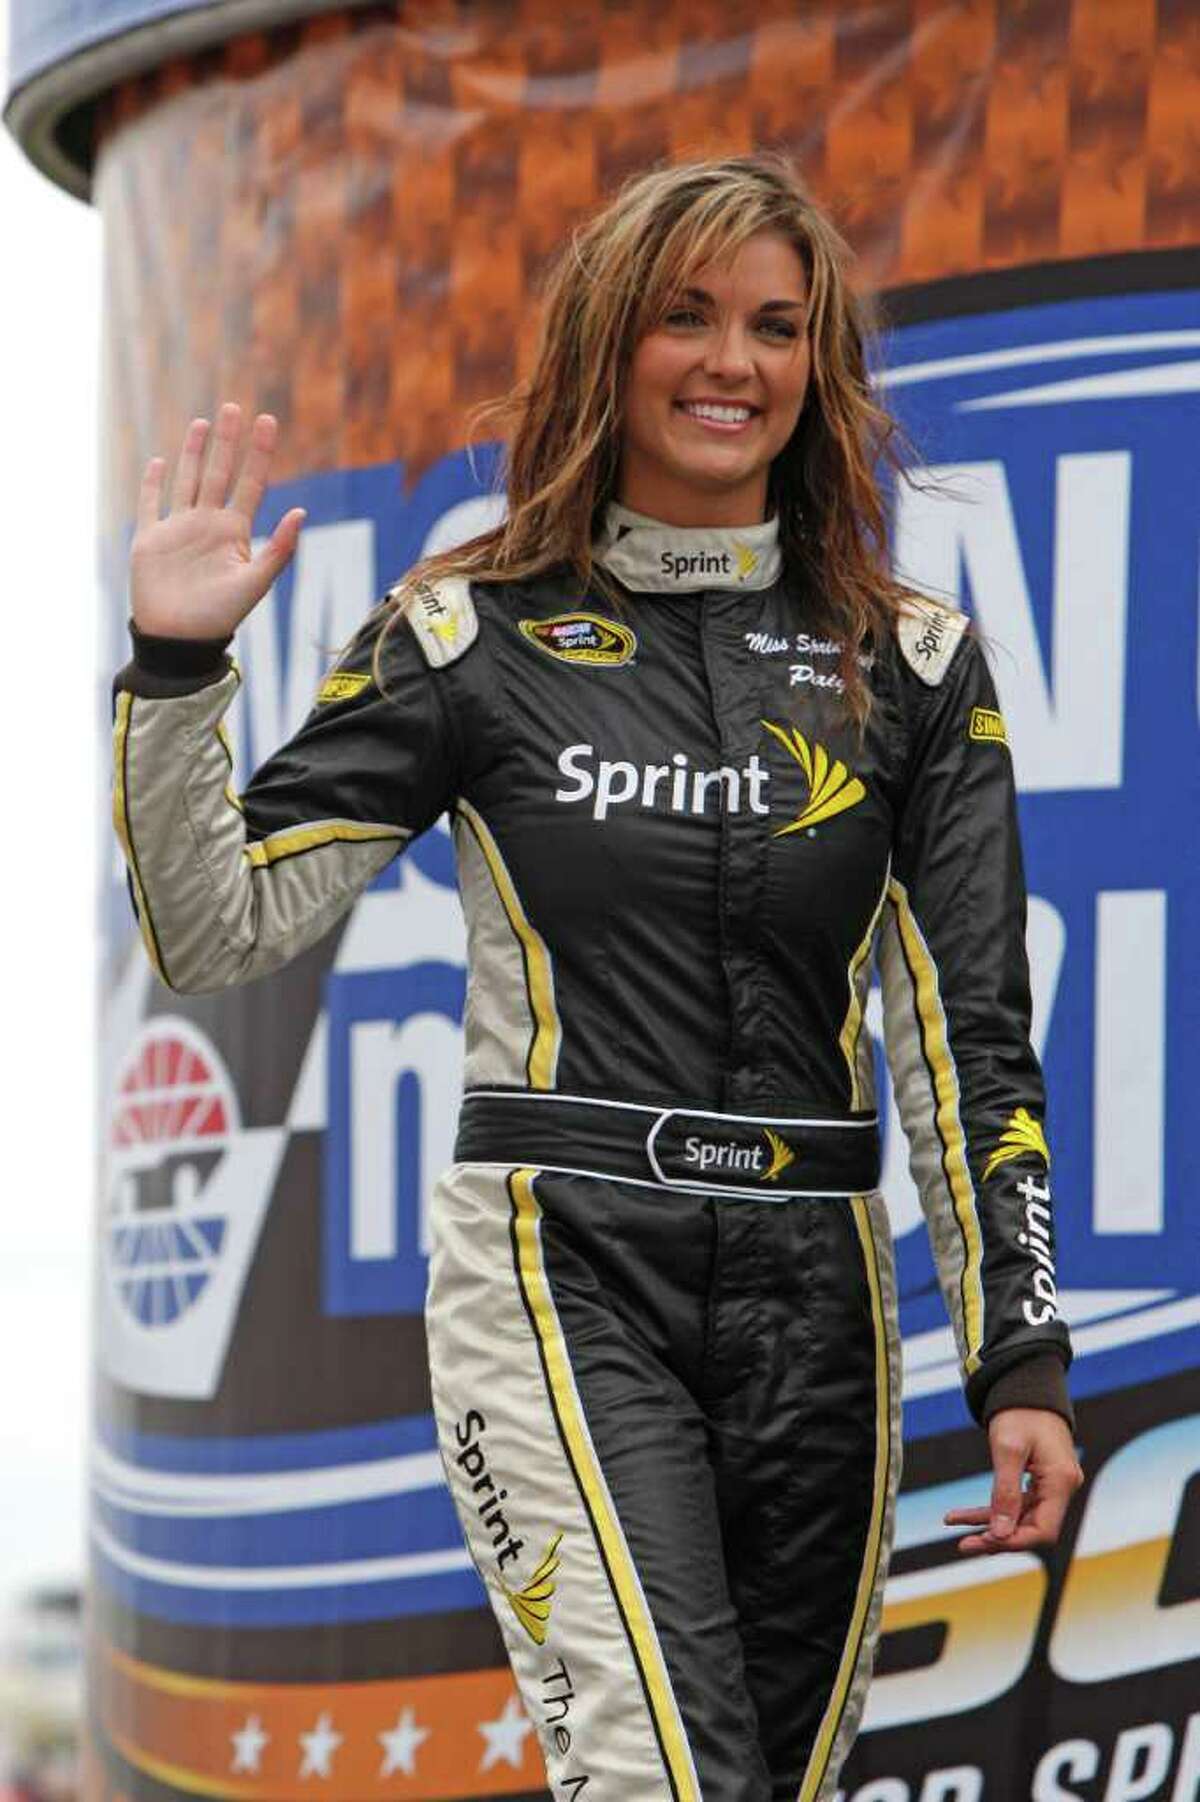 FILE - This April 19, 2010, file photo shows Miss Sprint Cup Paige Duke during driver introductions before the start of the NASCAR Sprint Cup Samsung Mobile 500 auto race at Texas Motor Speedway, in Fort Worth, Texas. NASCAR's Miss Sprint Cup has been let go after nude pictures of her appeared online. Paige Duke told The Charlotte Observer the pictures were taken when she was a freshman at Clemson University and were only meant for her boyfriend at the time.